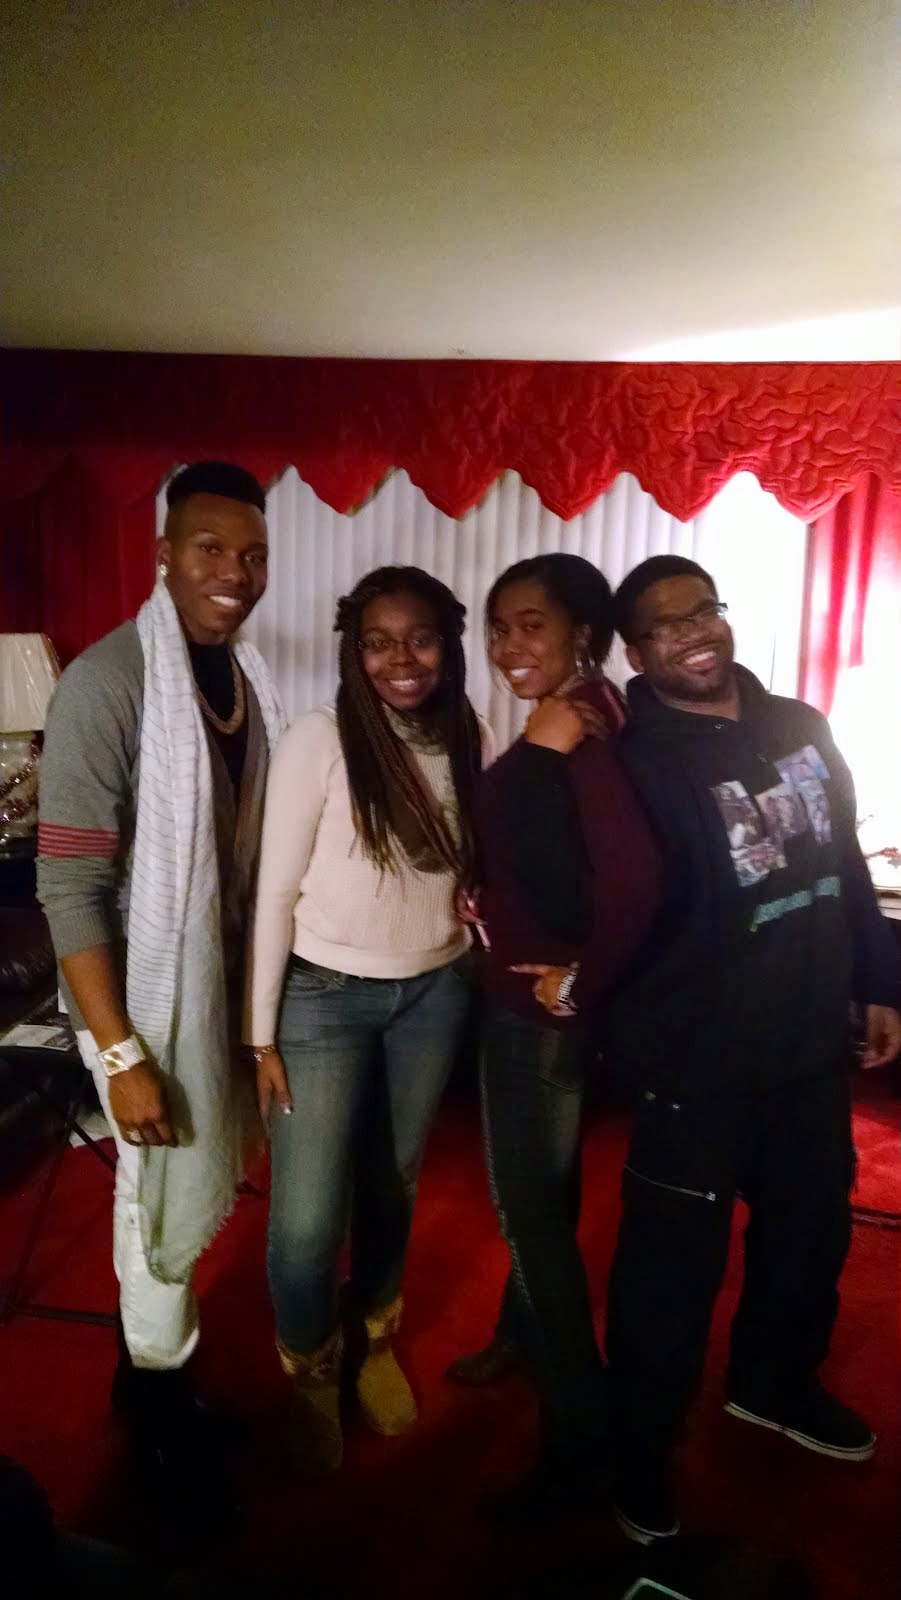 My brother, Me, My Sister, and Her Boyfriend